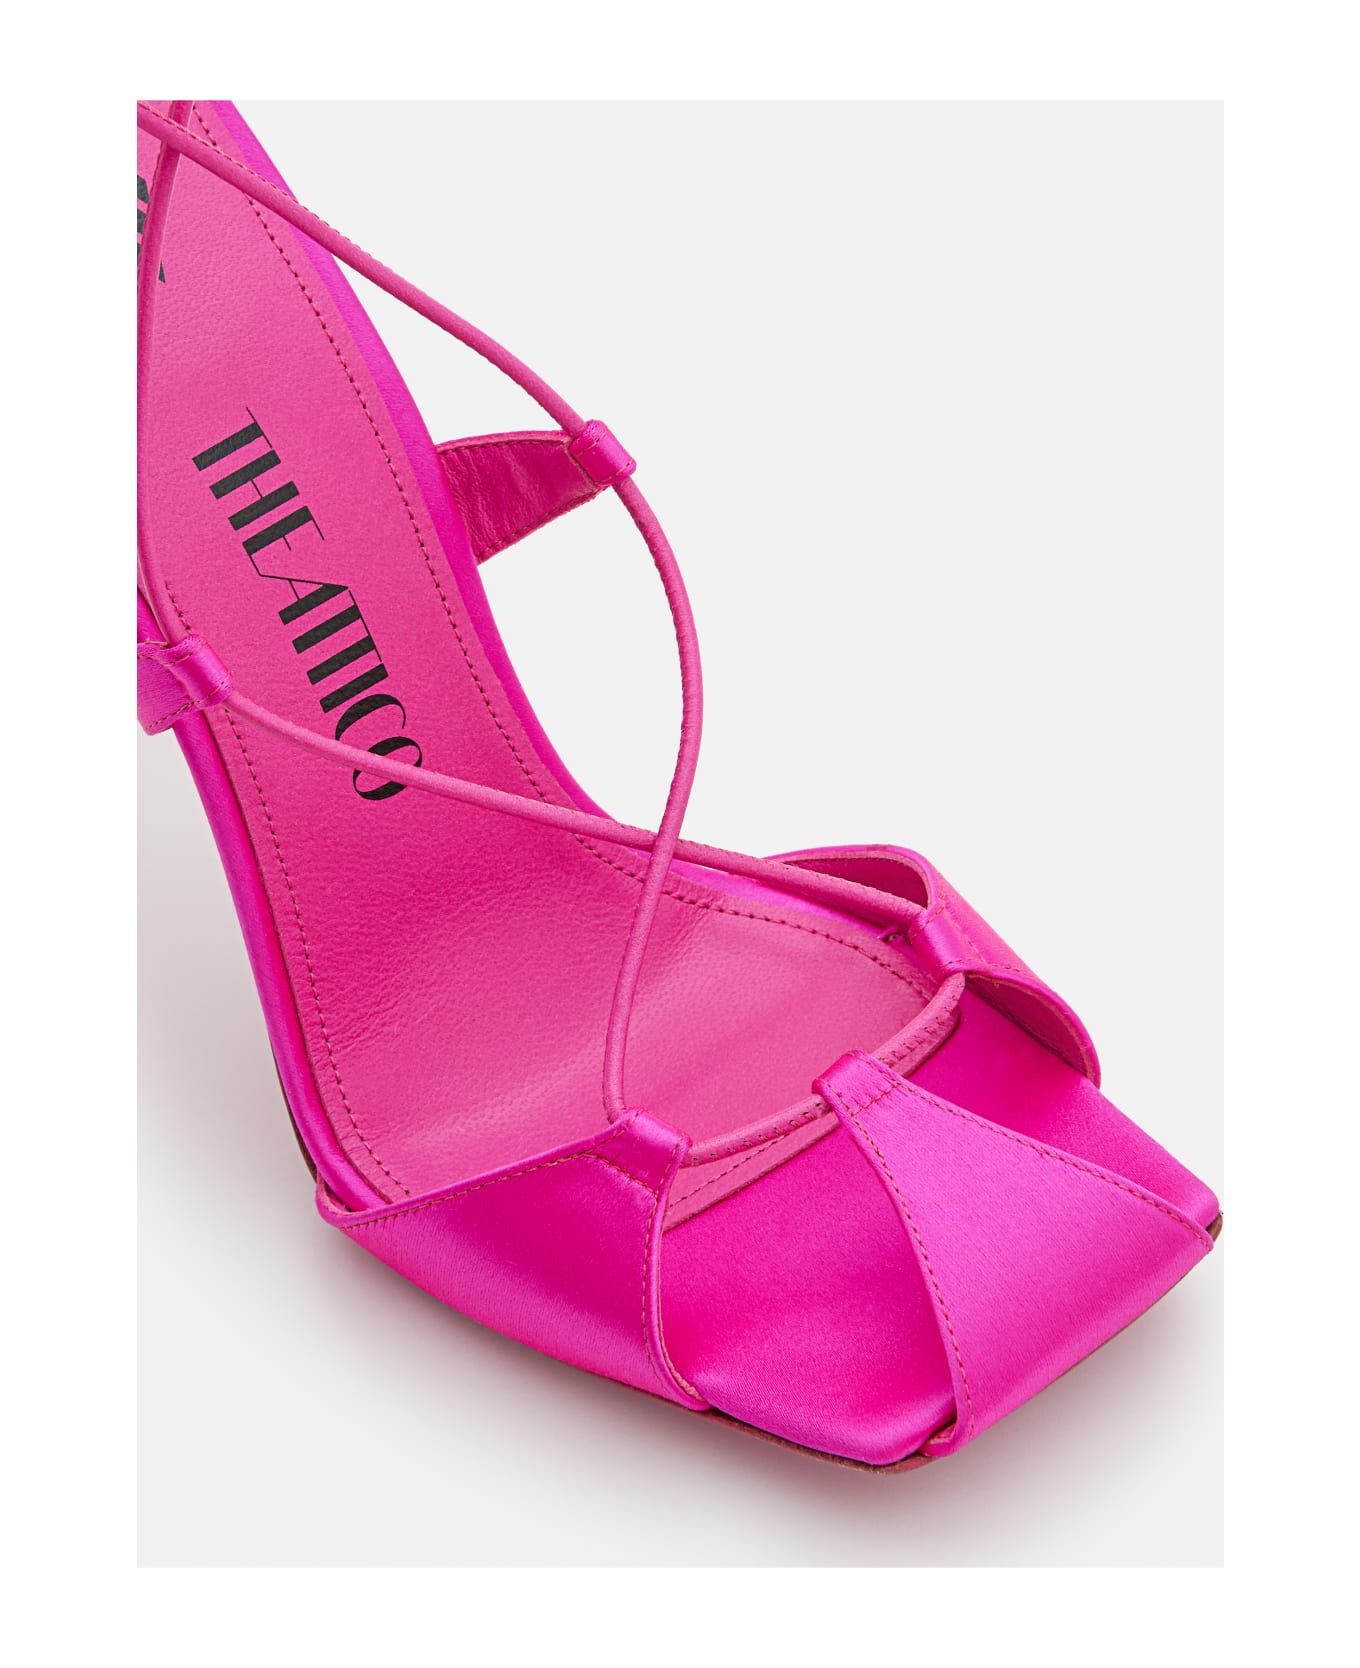 The Attico 105mm Adele Ankle Strap Sandals - Pink